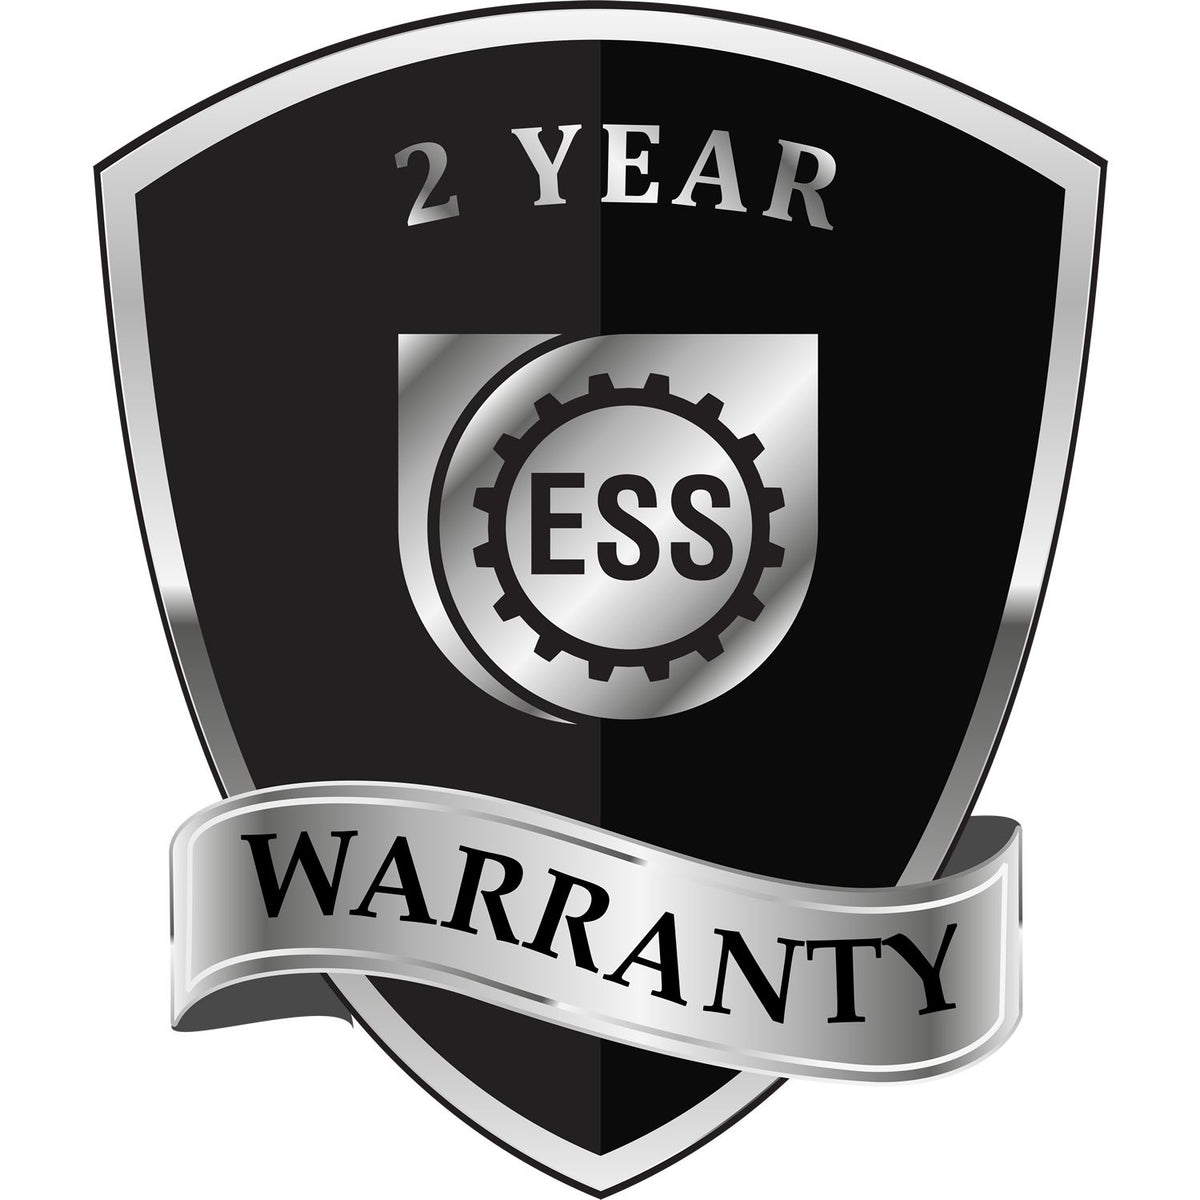 A badge or emblem showing a warranty icon for the Soft Delaware Professional Engineer Seal